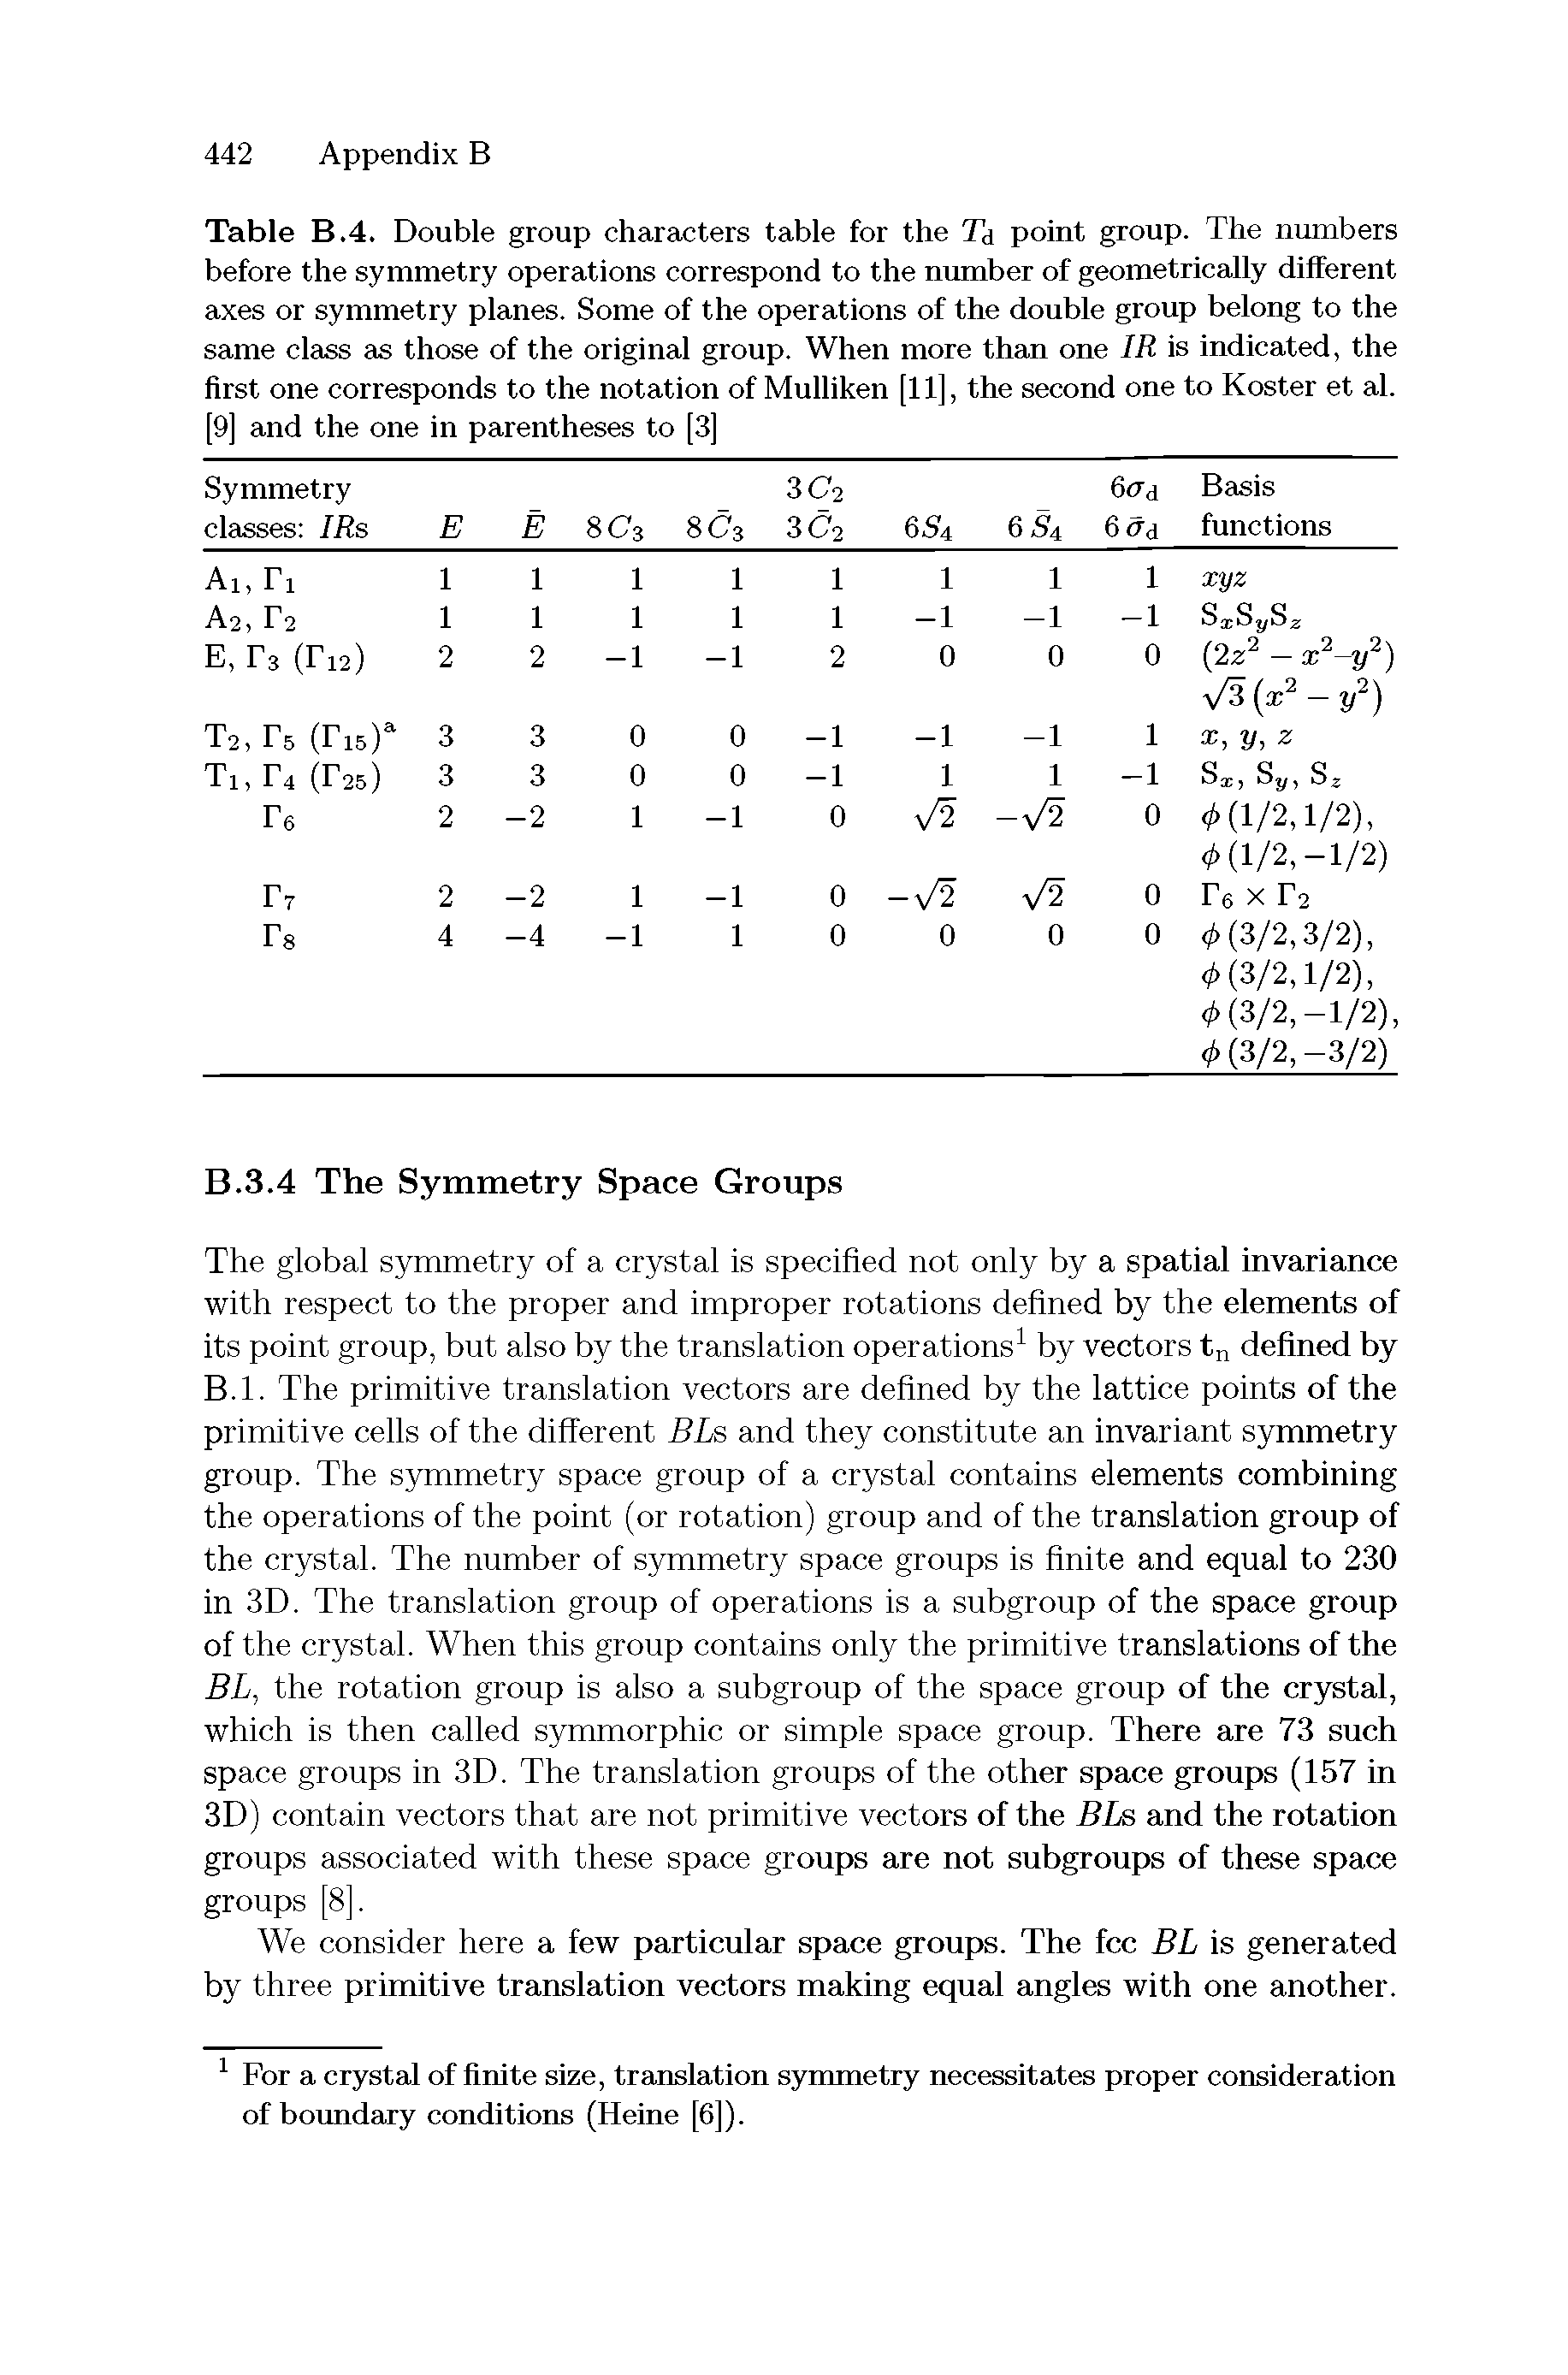 Table B.4. Double group characters table for the Ta point group. The numbers before the symmetry operations correspond to the number of geometrically different axes or symmetry planes. Some of the operations of the double group belong to the same class as those of the original group. When more than one IR is indicated, the first one corresponds to the notation of Mulliken [11], the second one to Koster et al. [9] and the one in parentheses to [3]...